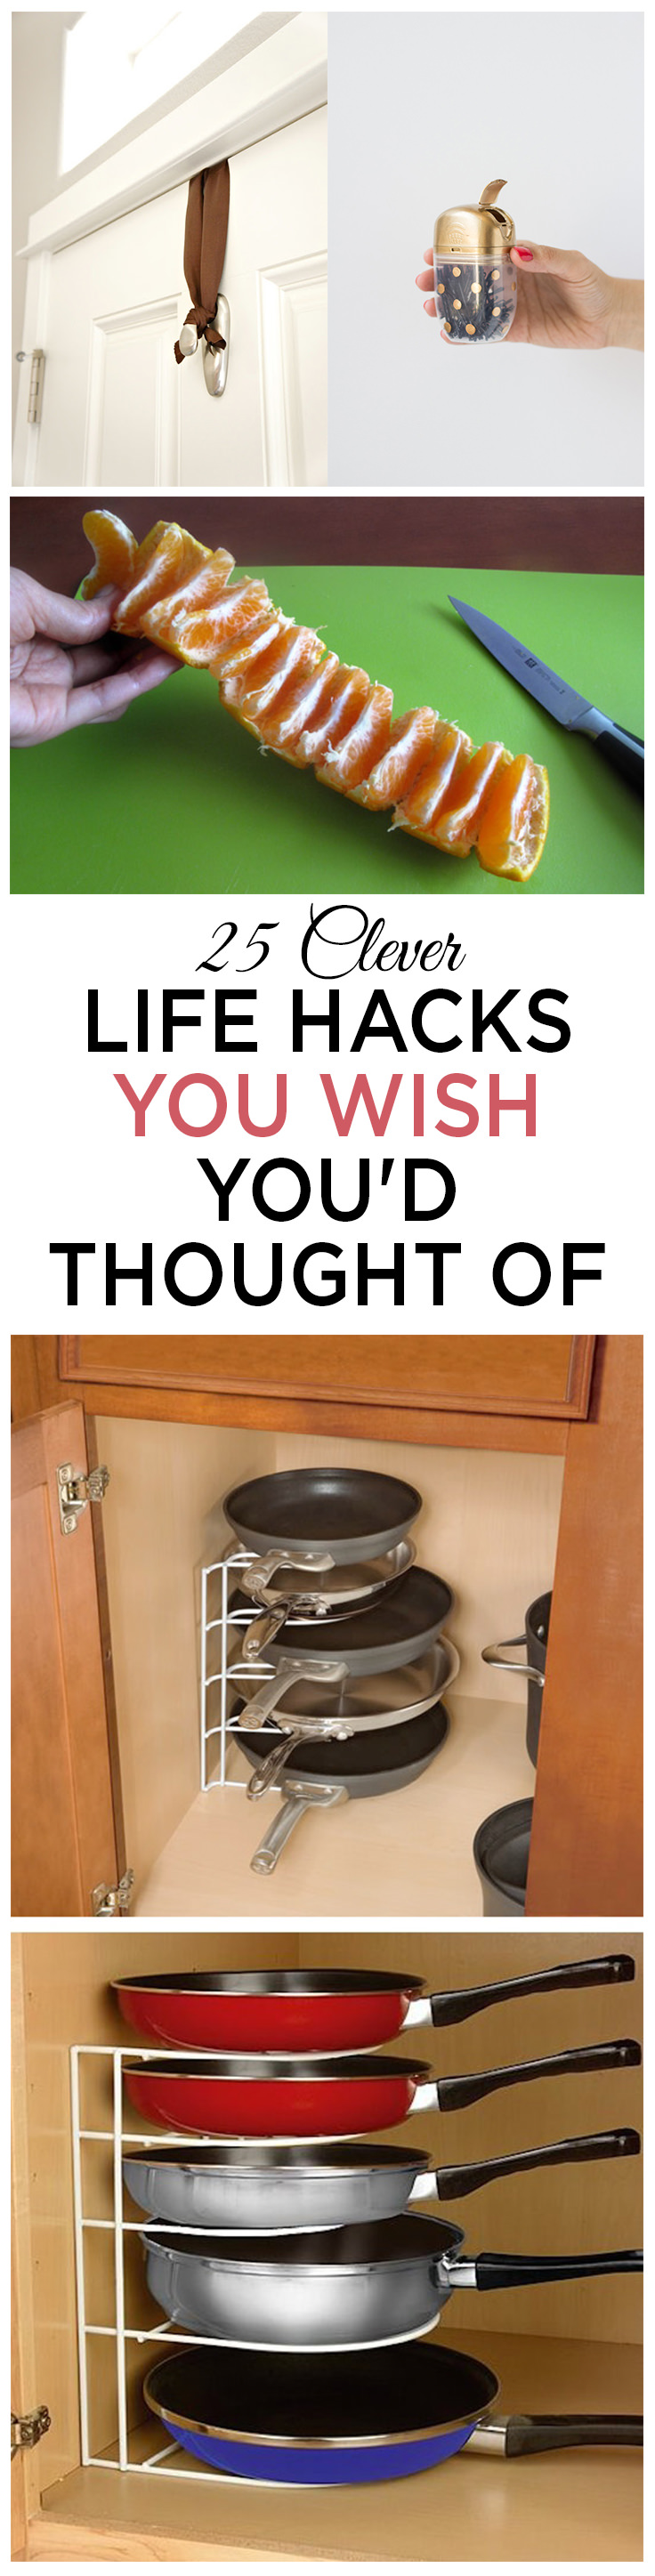 Everyone knows life can get pretty complicated sometimes, so with the list of these 25 life hacks, you can make your life just a smidgen easier the next time around. Be sure to check them out!